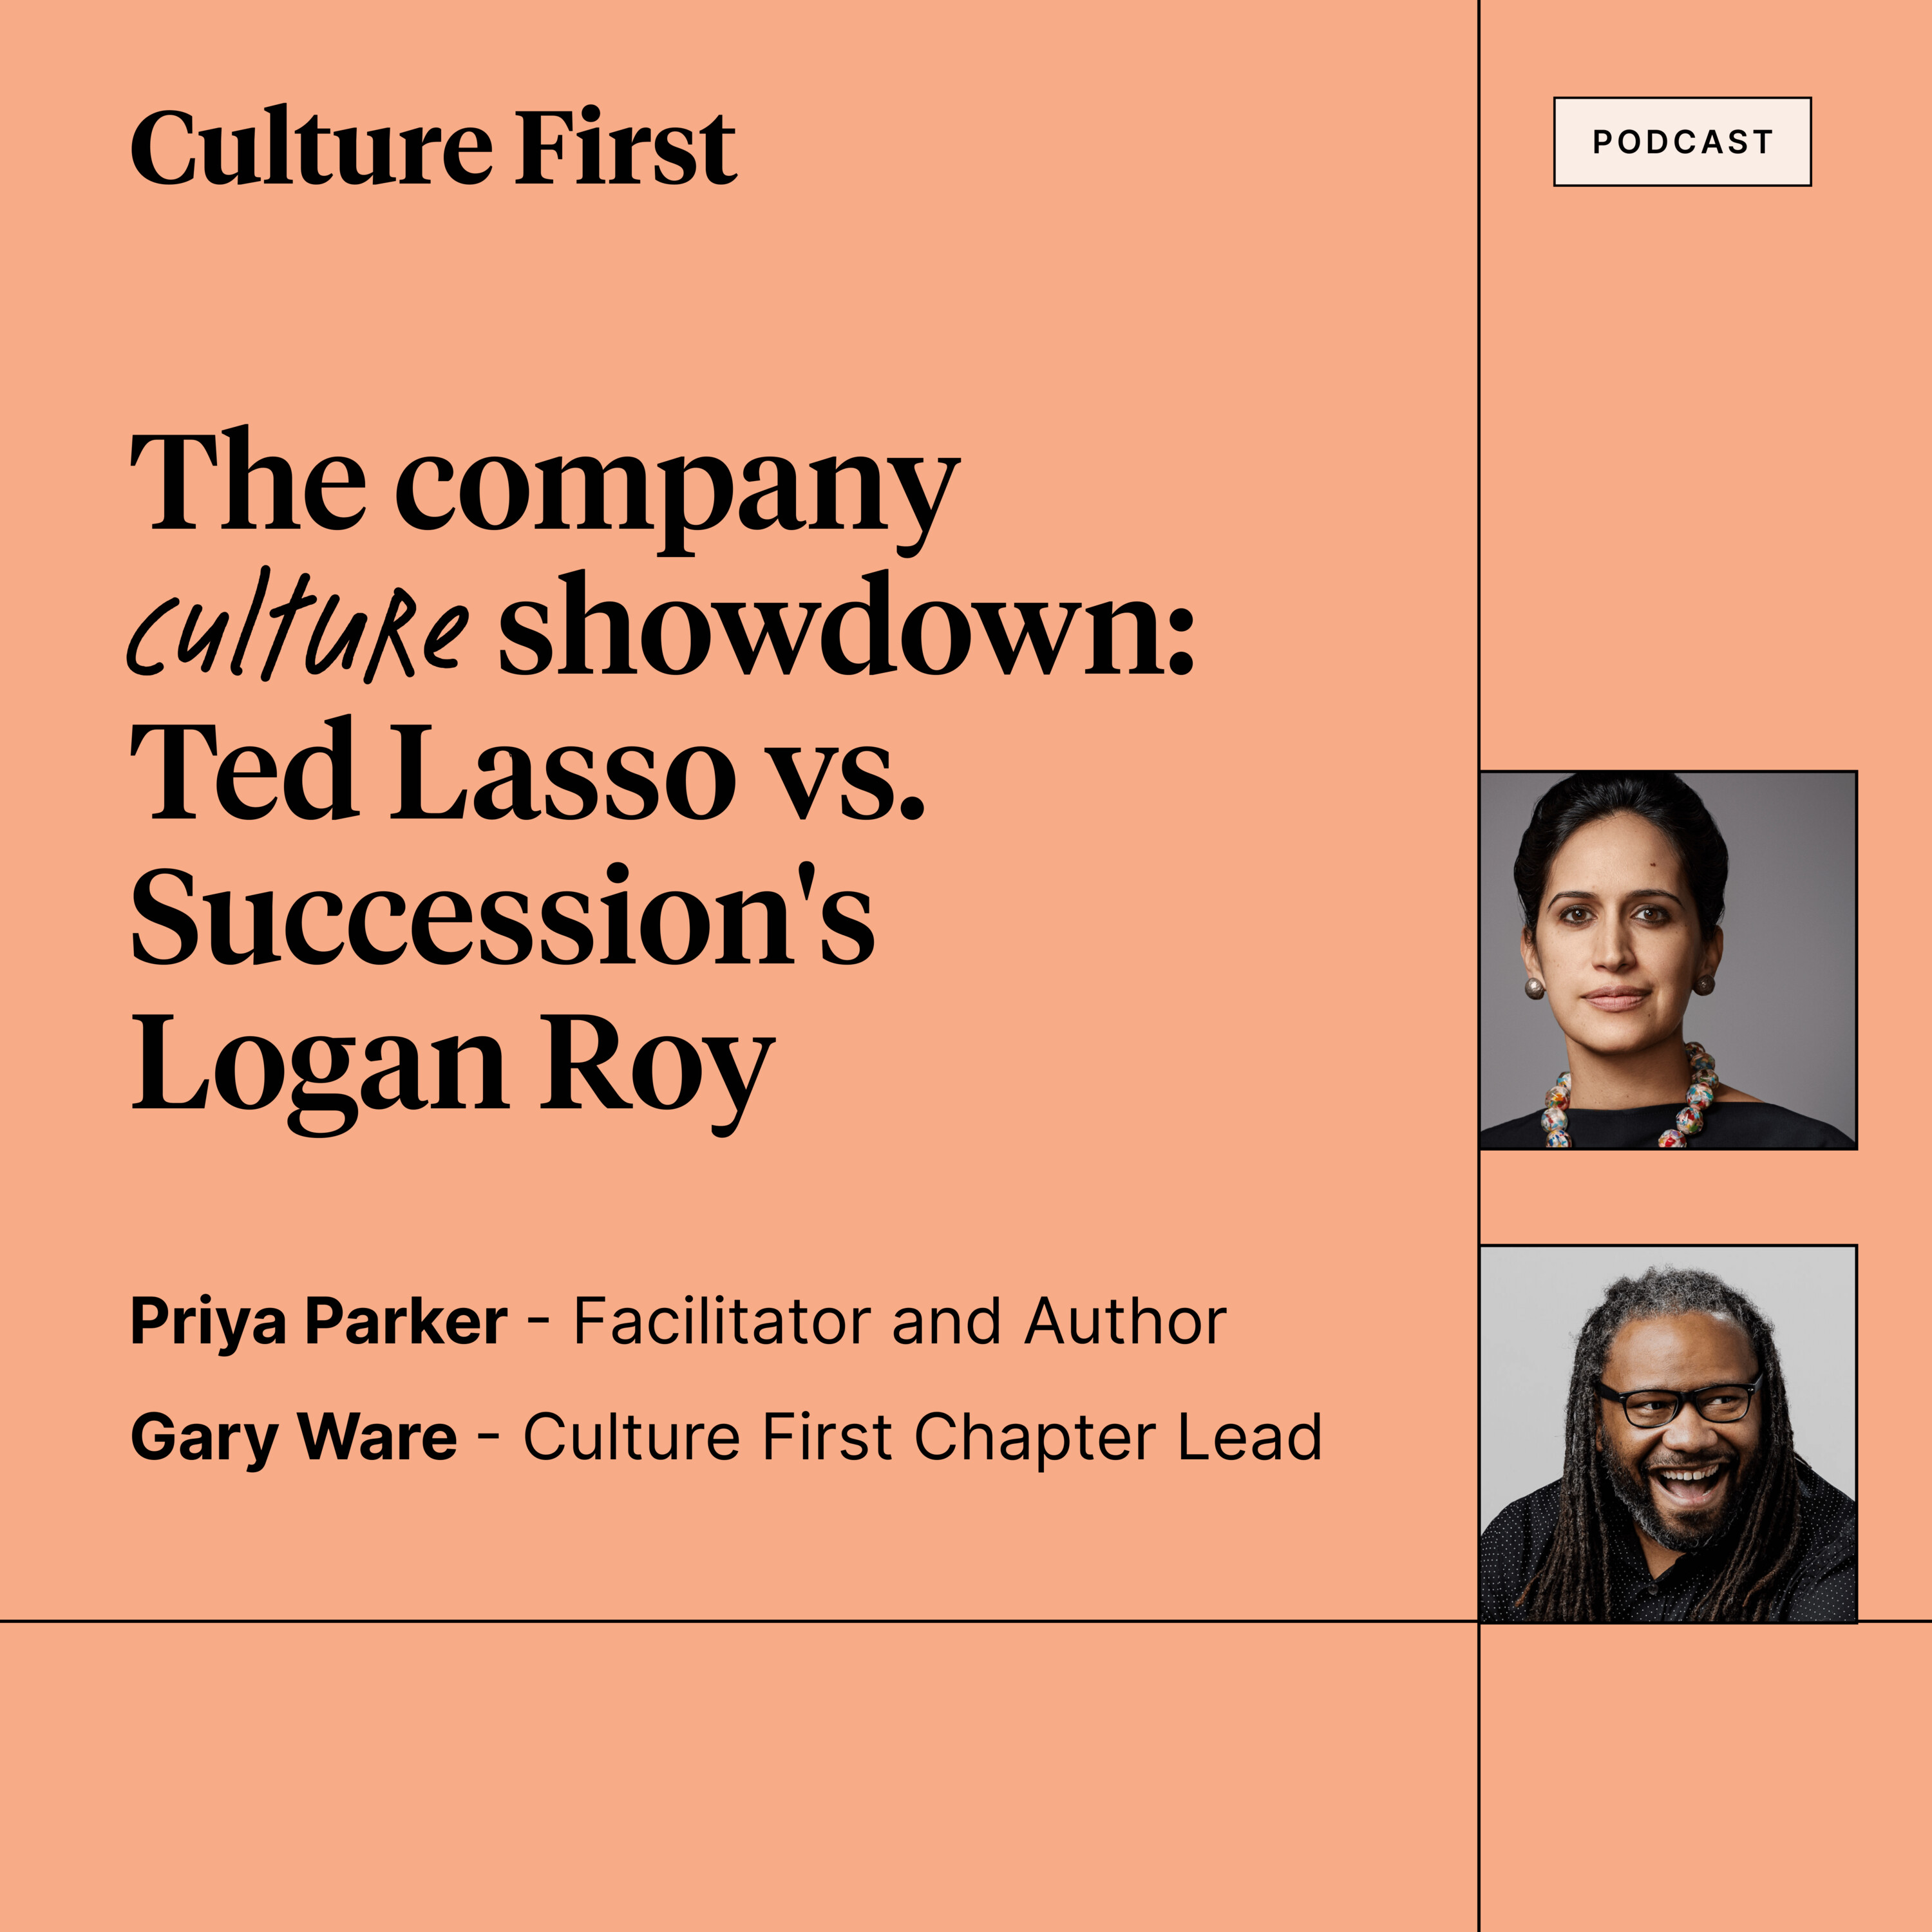 Priya Parker and Gary Ware discuss the company culture showdown: Ted Lasso vs. Succession’s Logan Roy.